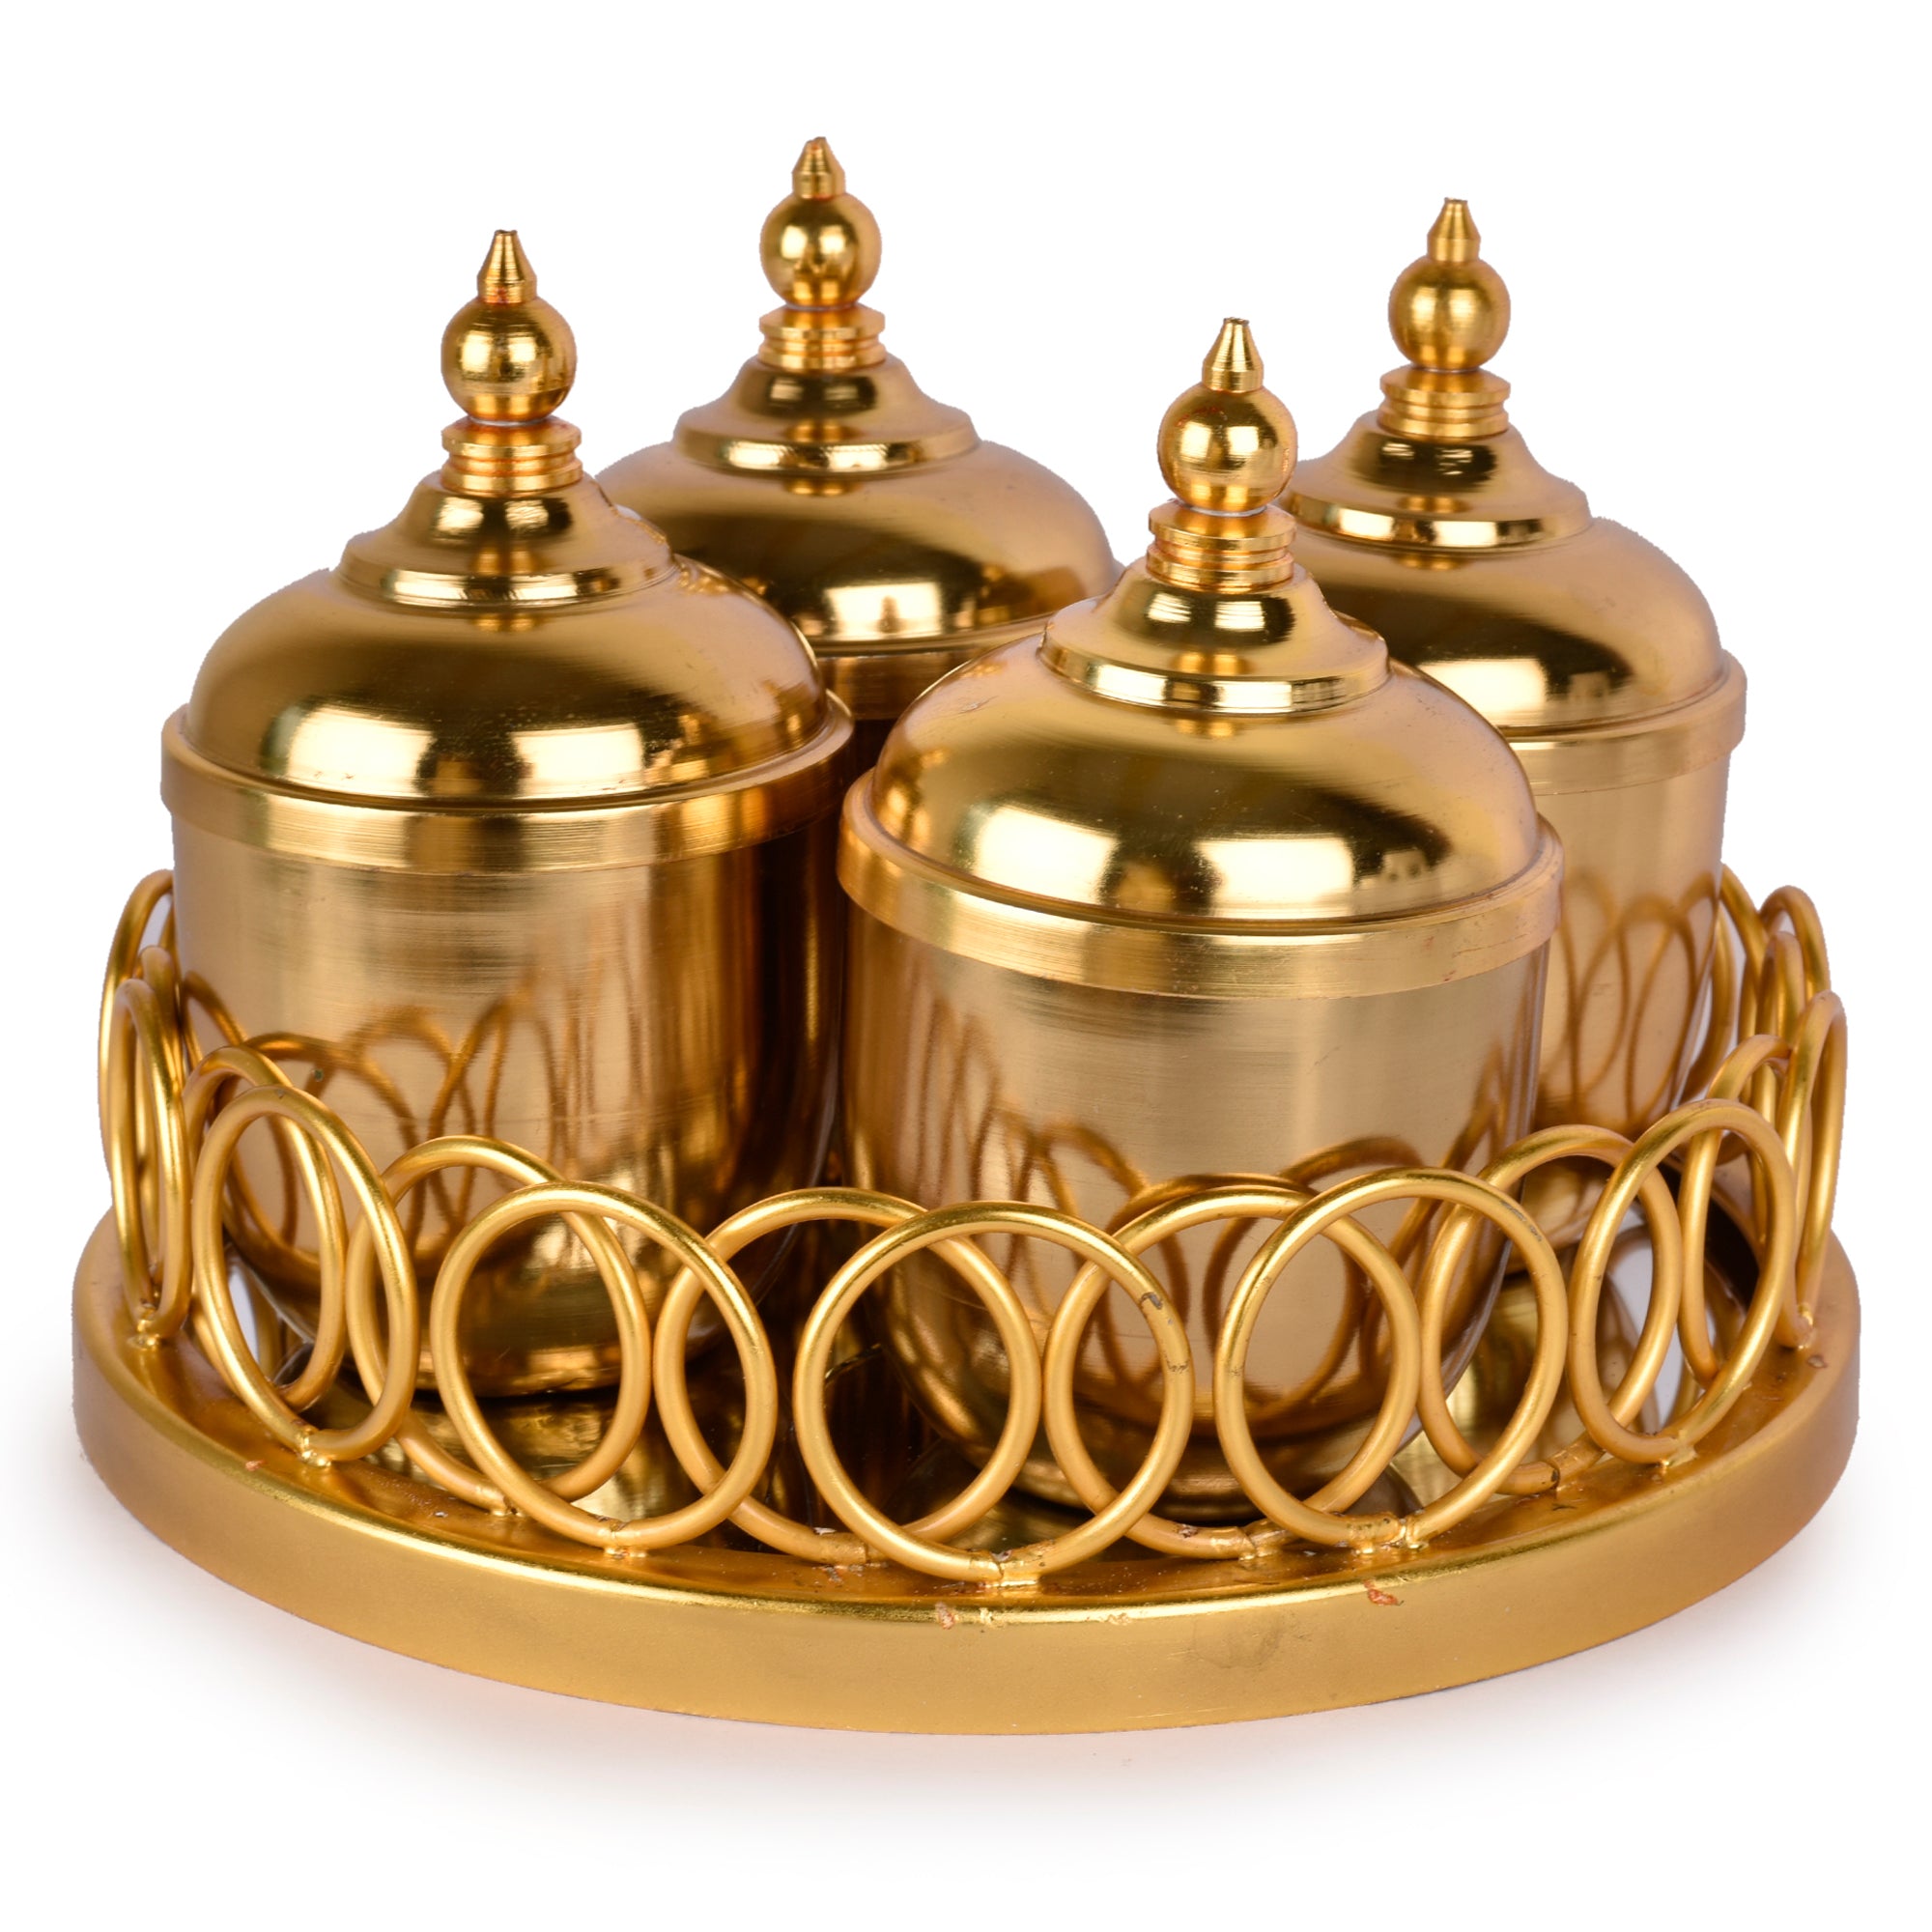 Ortis Tray With 4 Jars Gold Finish